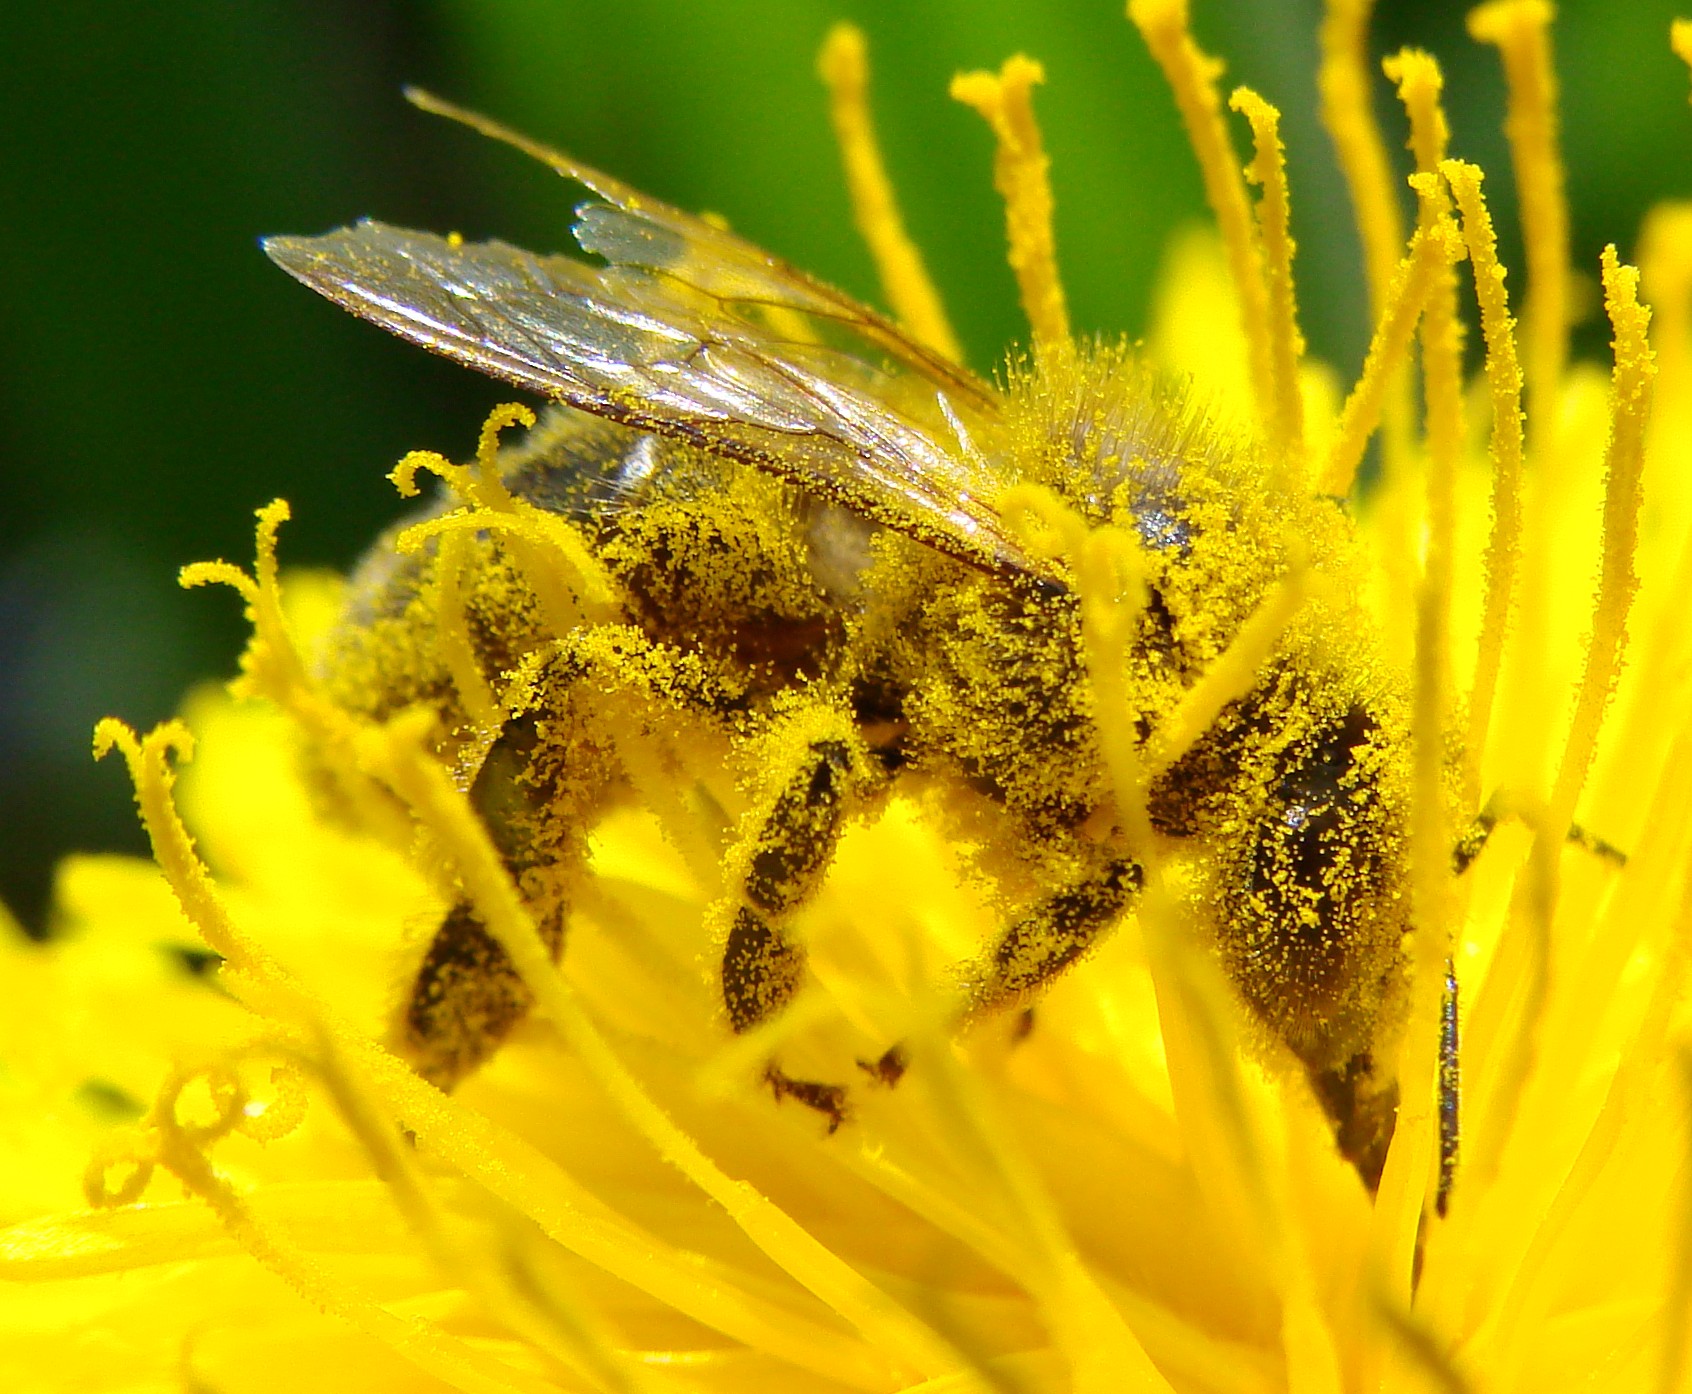 The crucial role of pollinators in the insect world